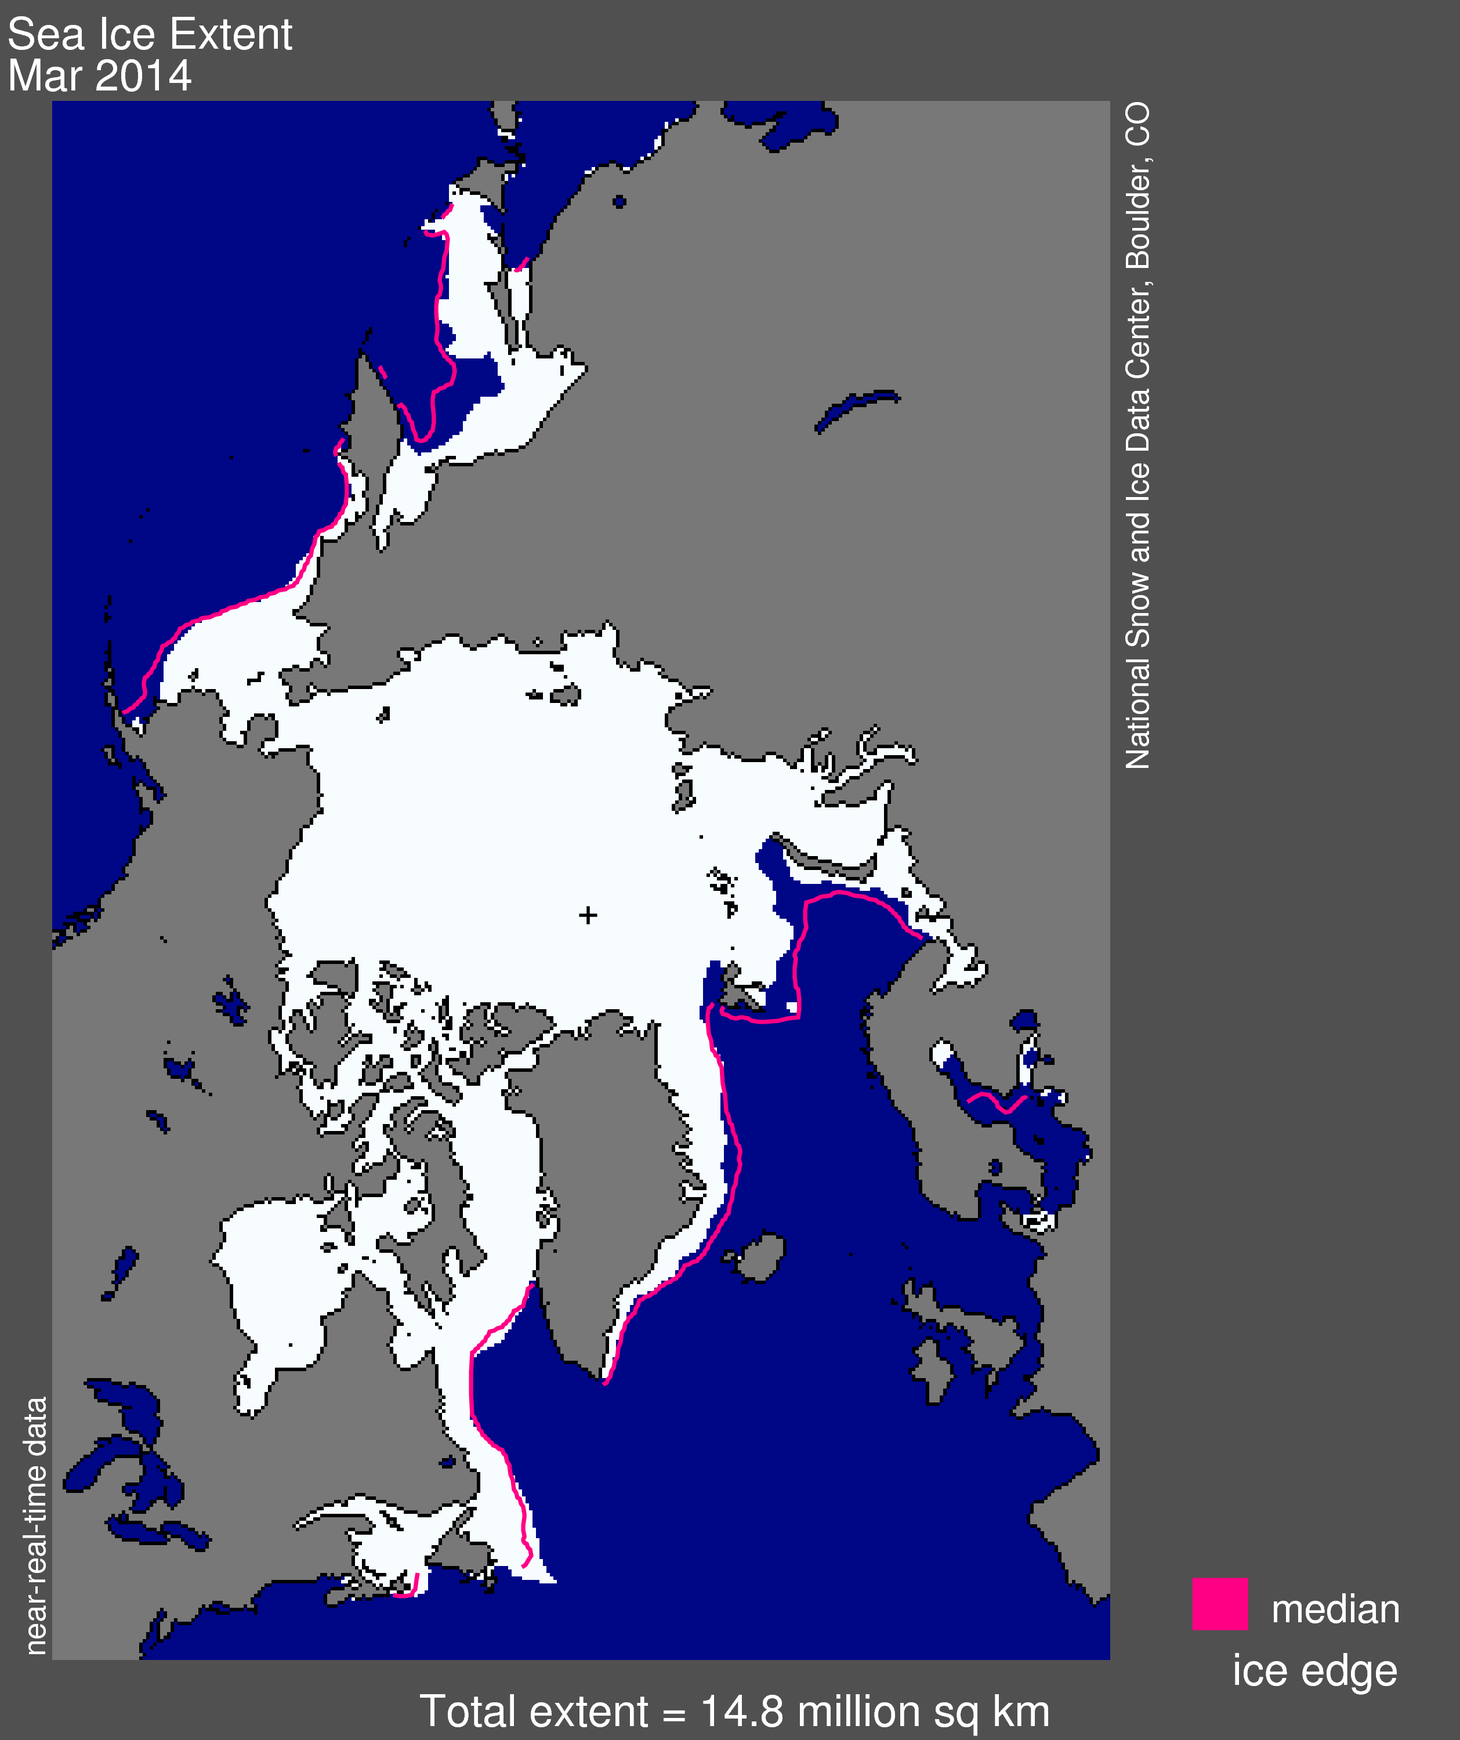 Arctic sea ice extent for March 2014